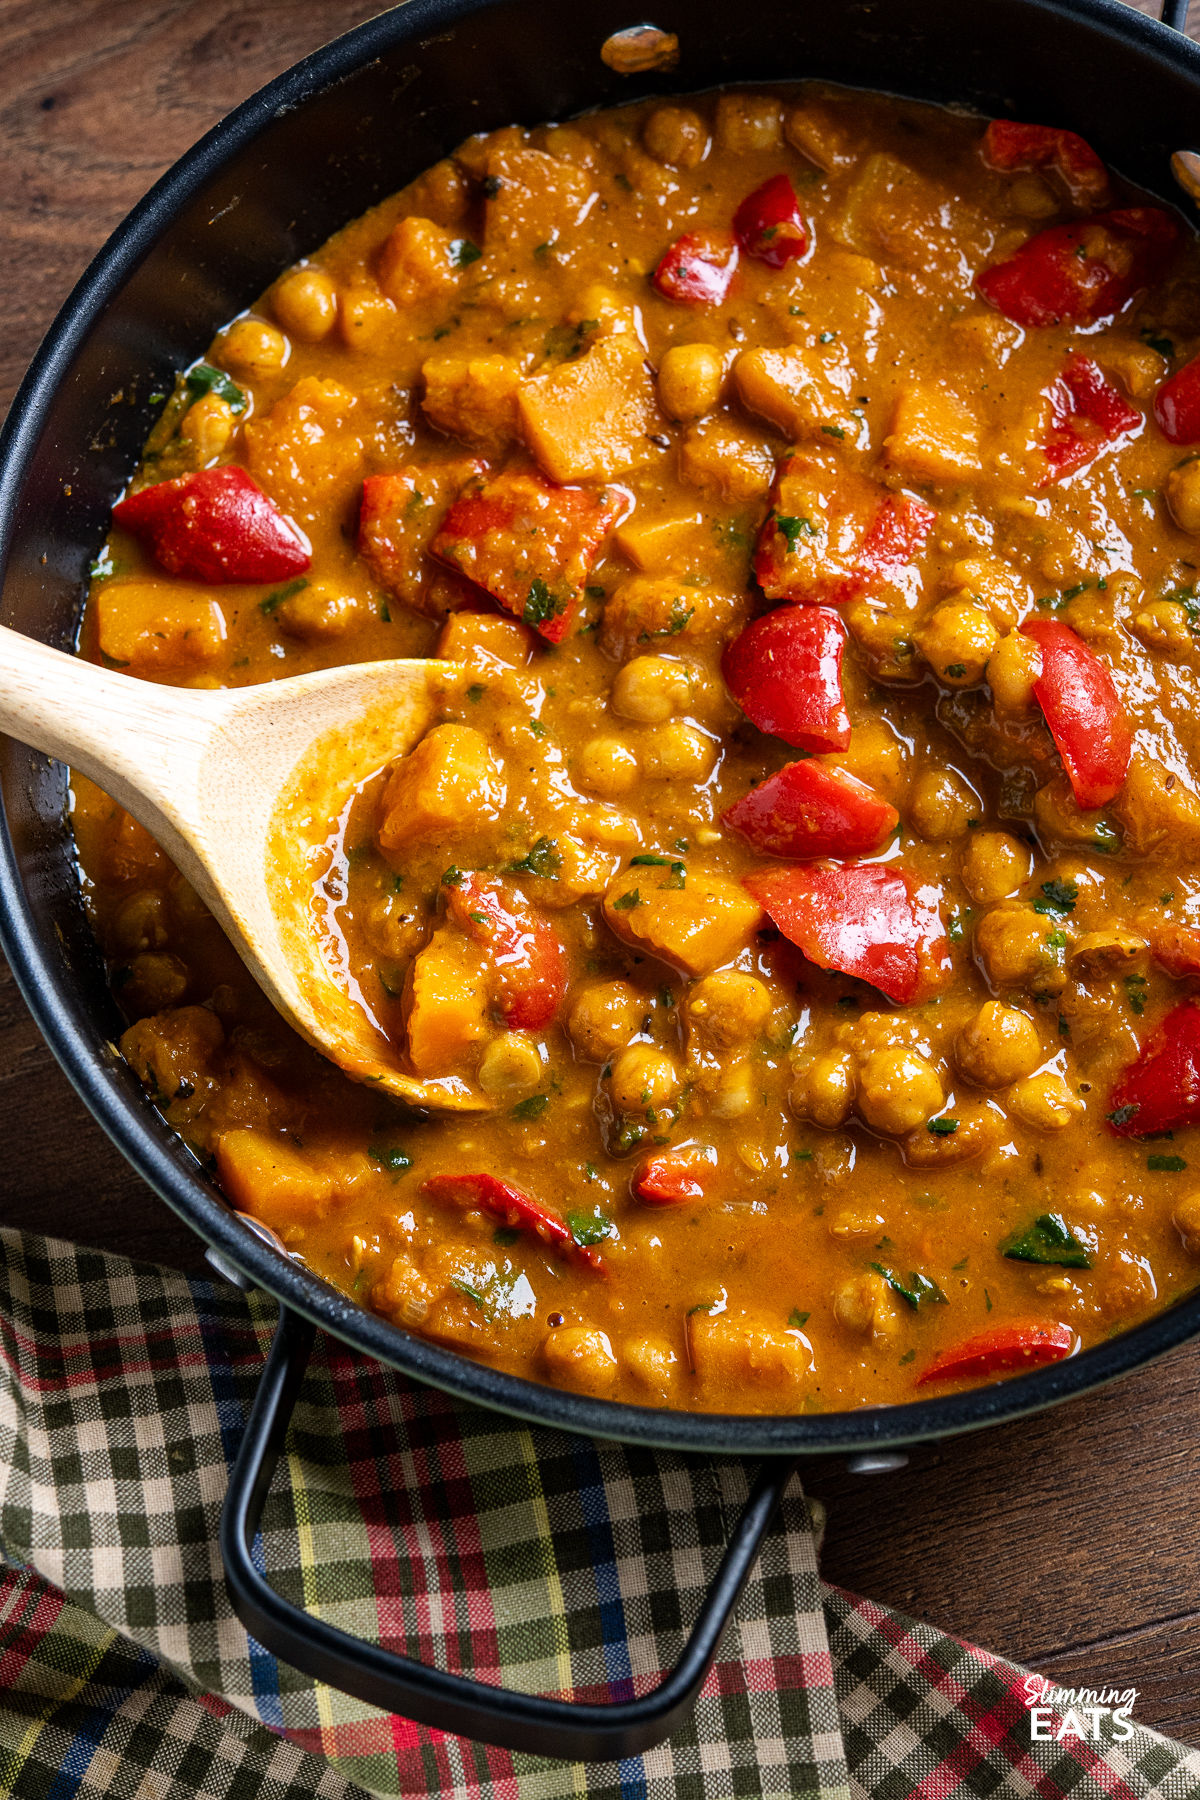 A vibrant chickpea butternut squash curry in a green double-handled frying pan with a wooden spoon